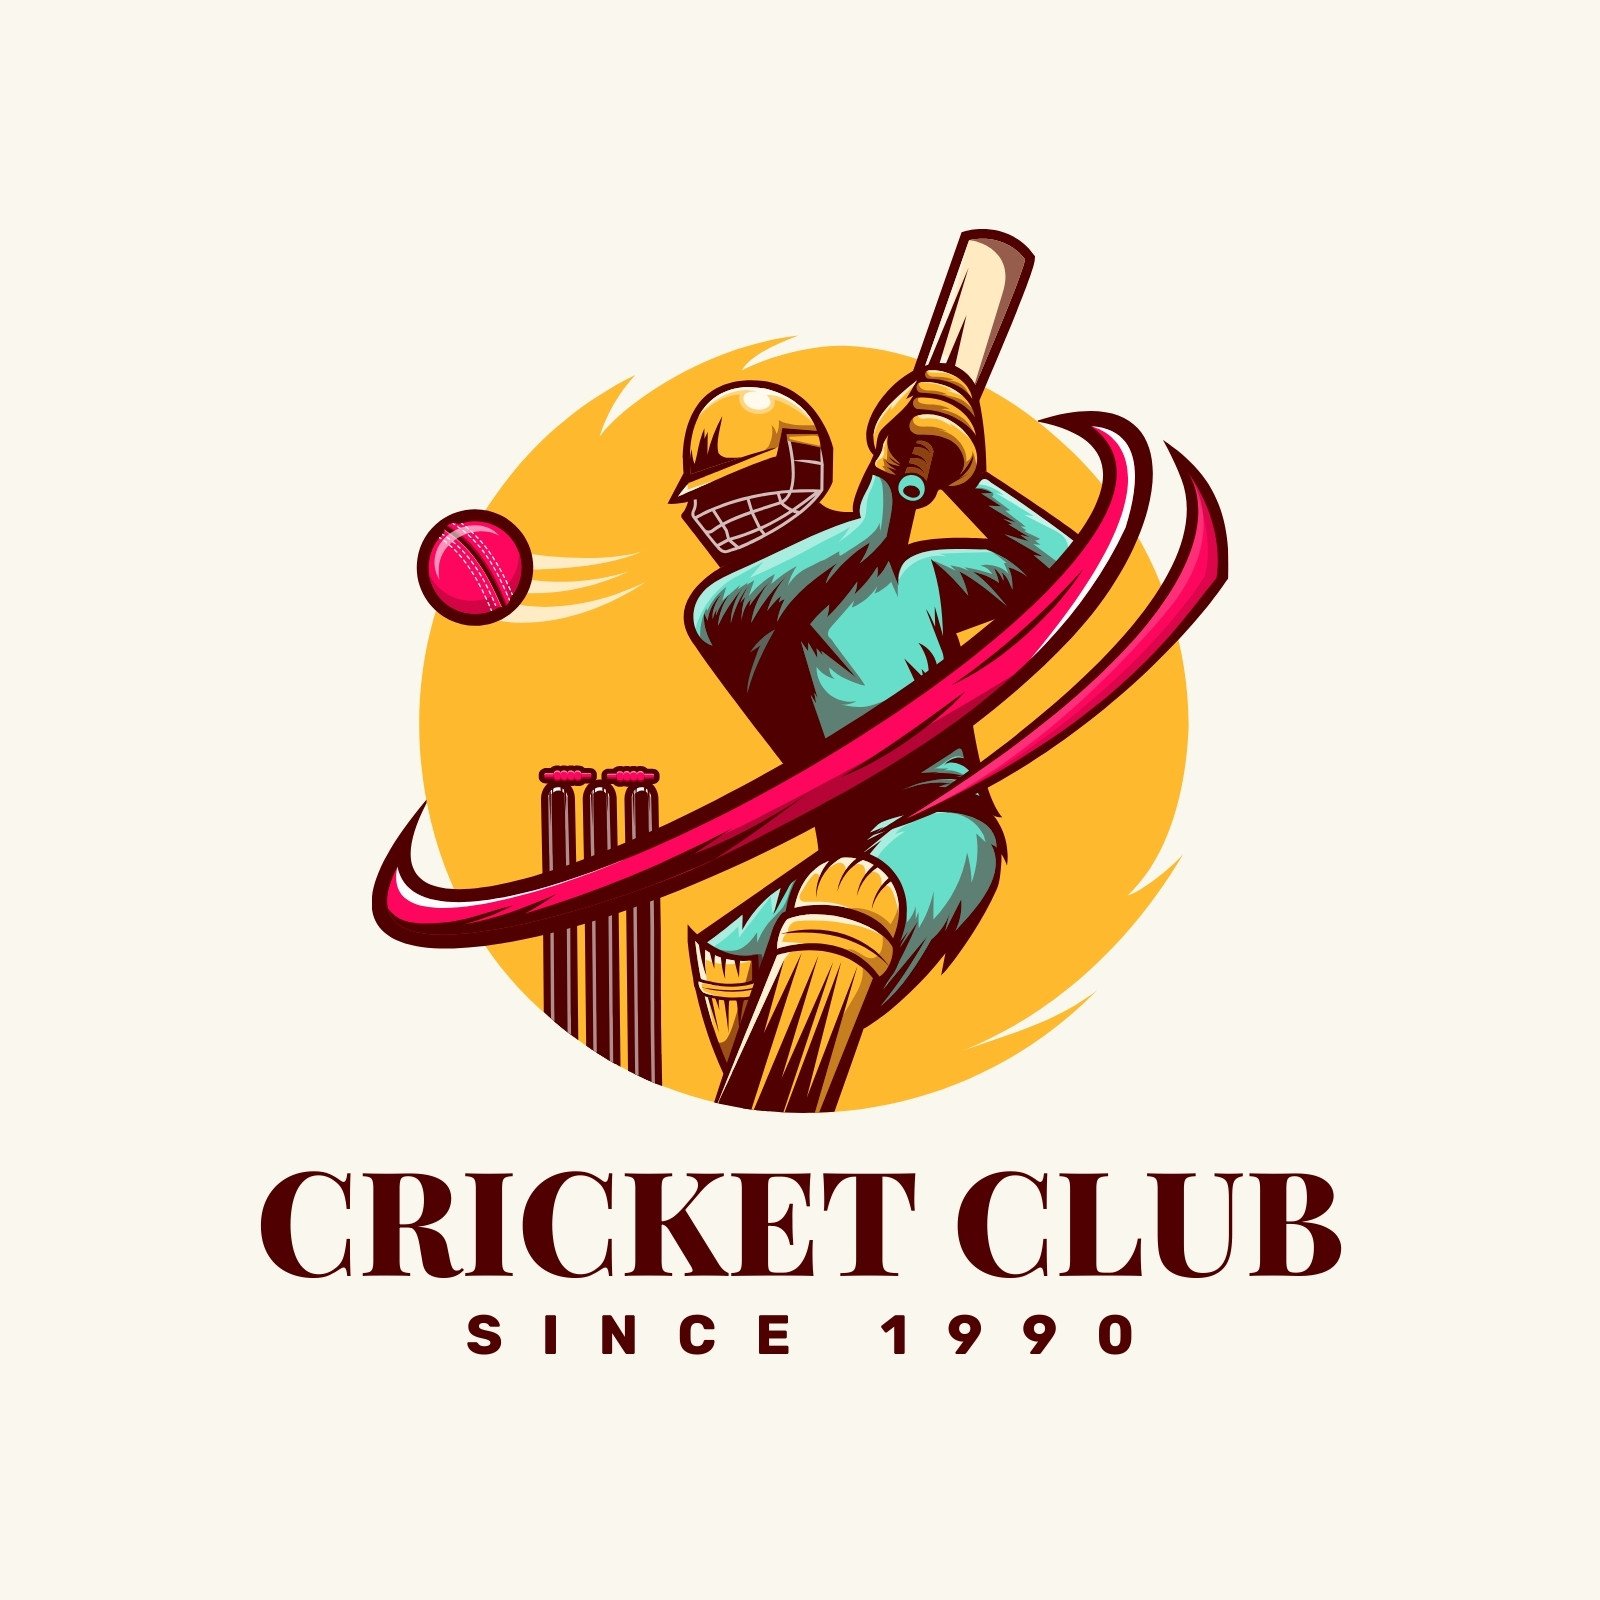 Warriors cricket logo png images | PNGWing